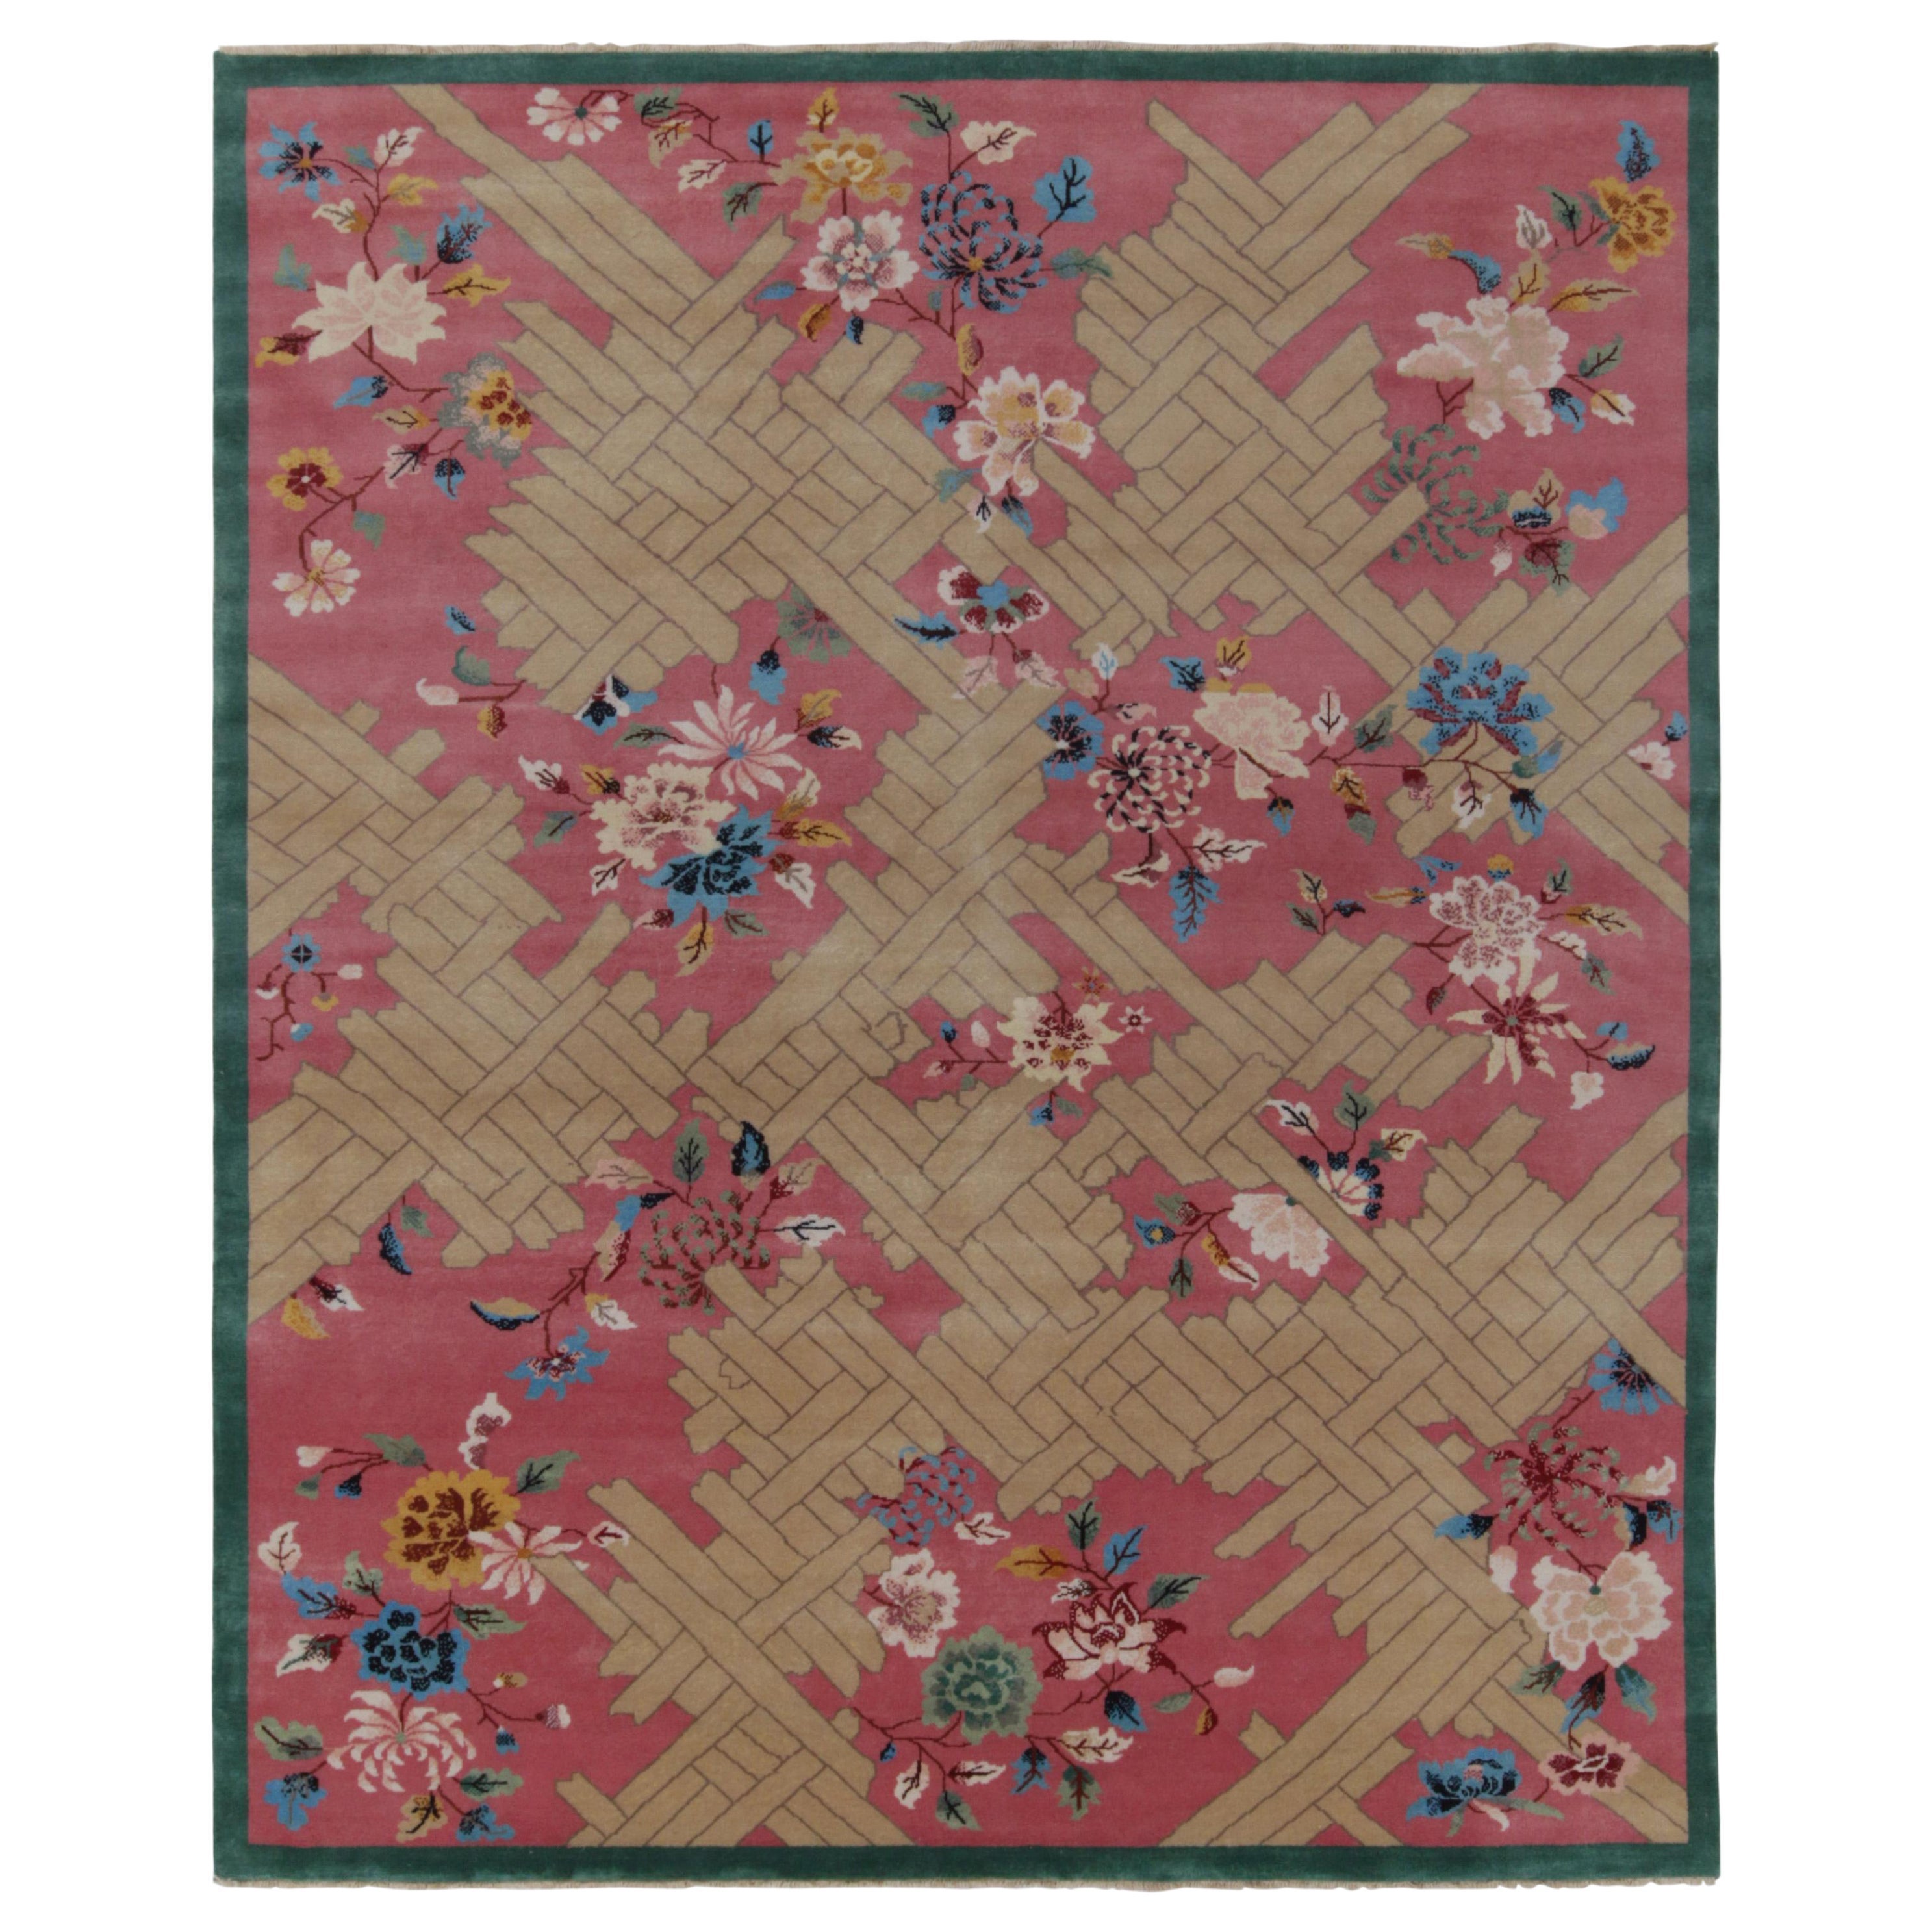 Rug & Kilim’s Chinese Deco Style Rug in Pink, Beige & Blue Floral Patterns